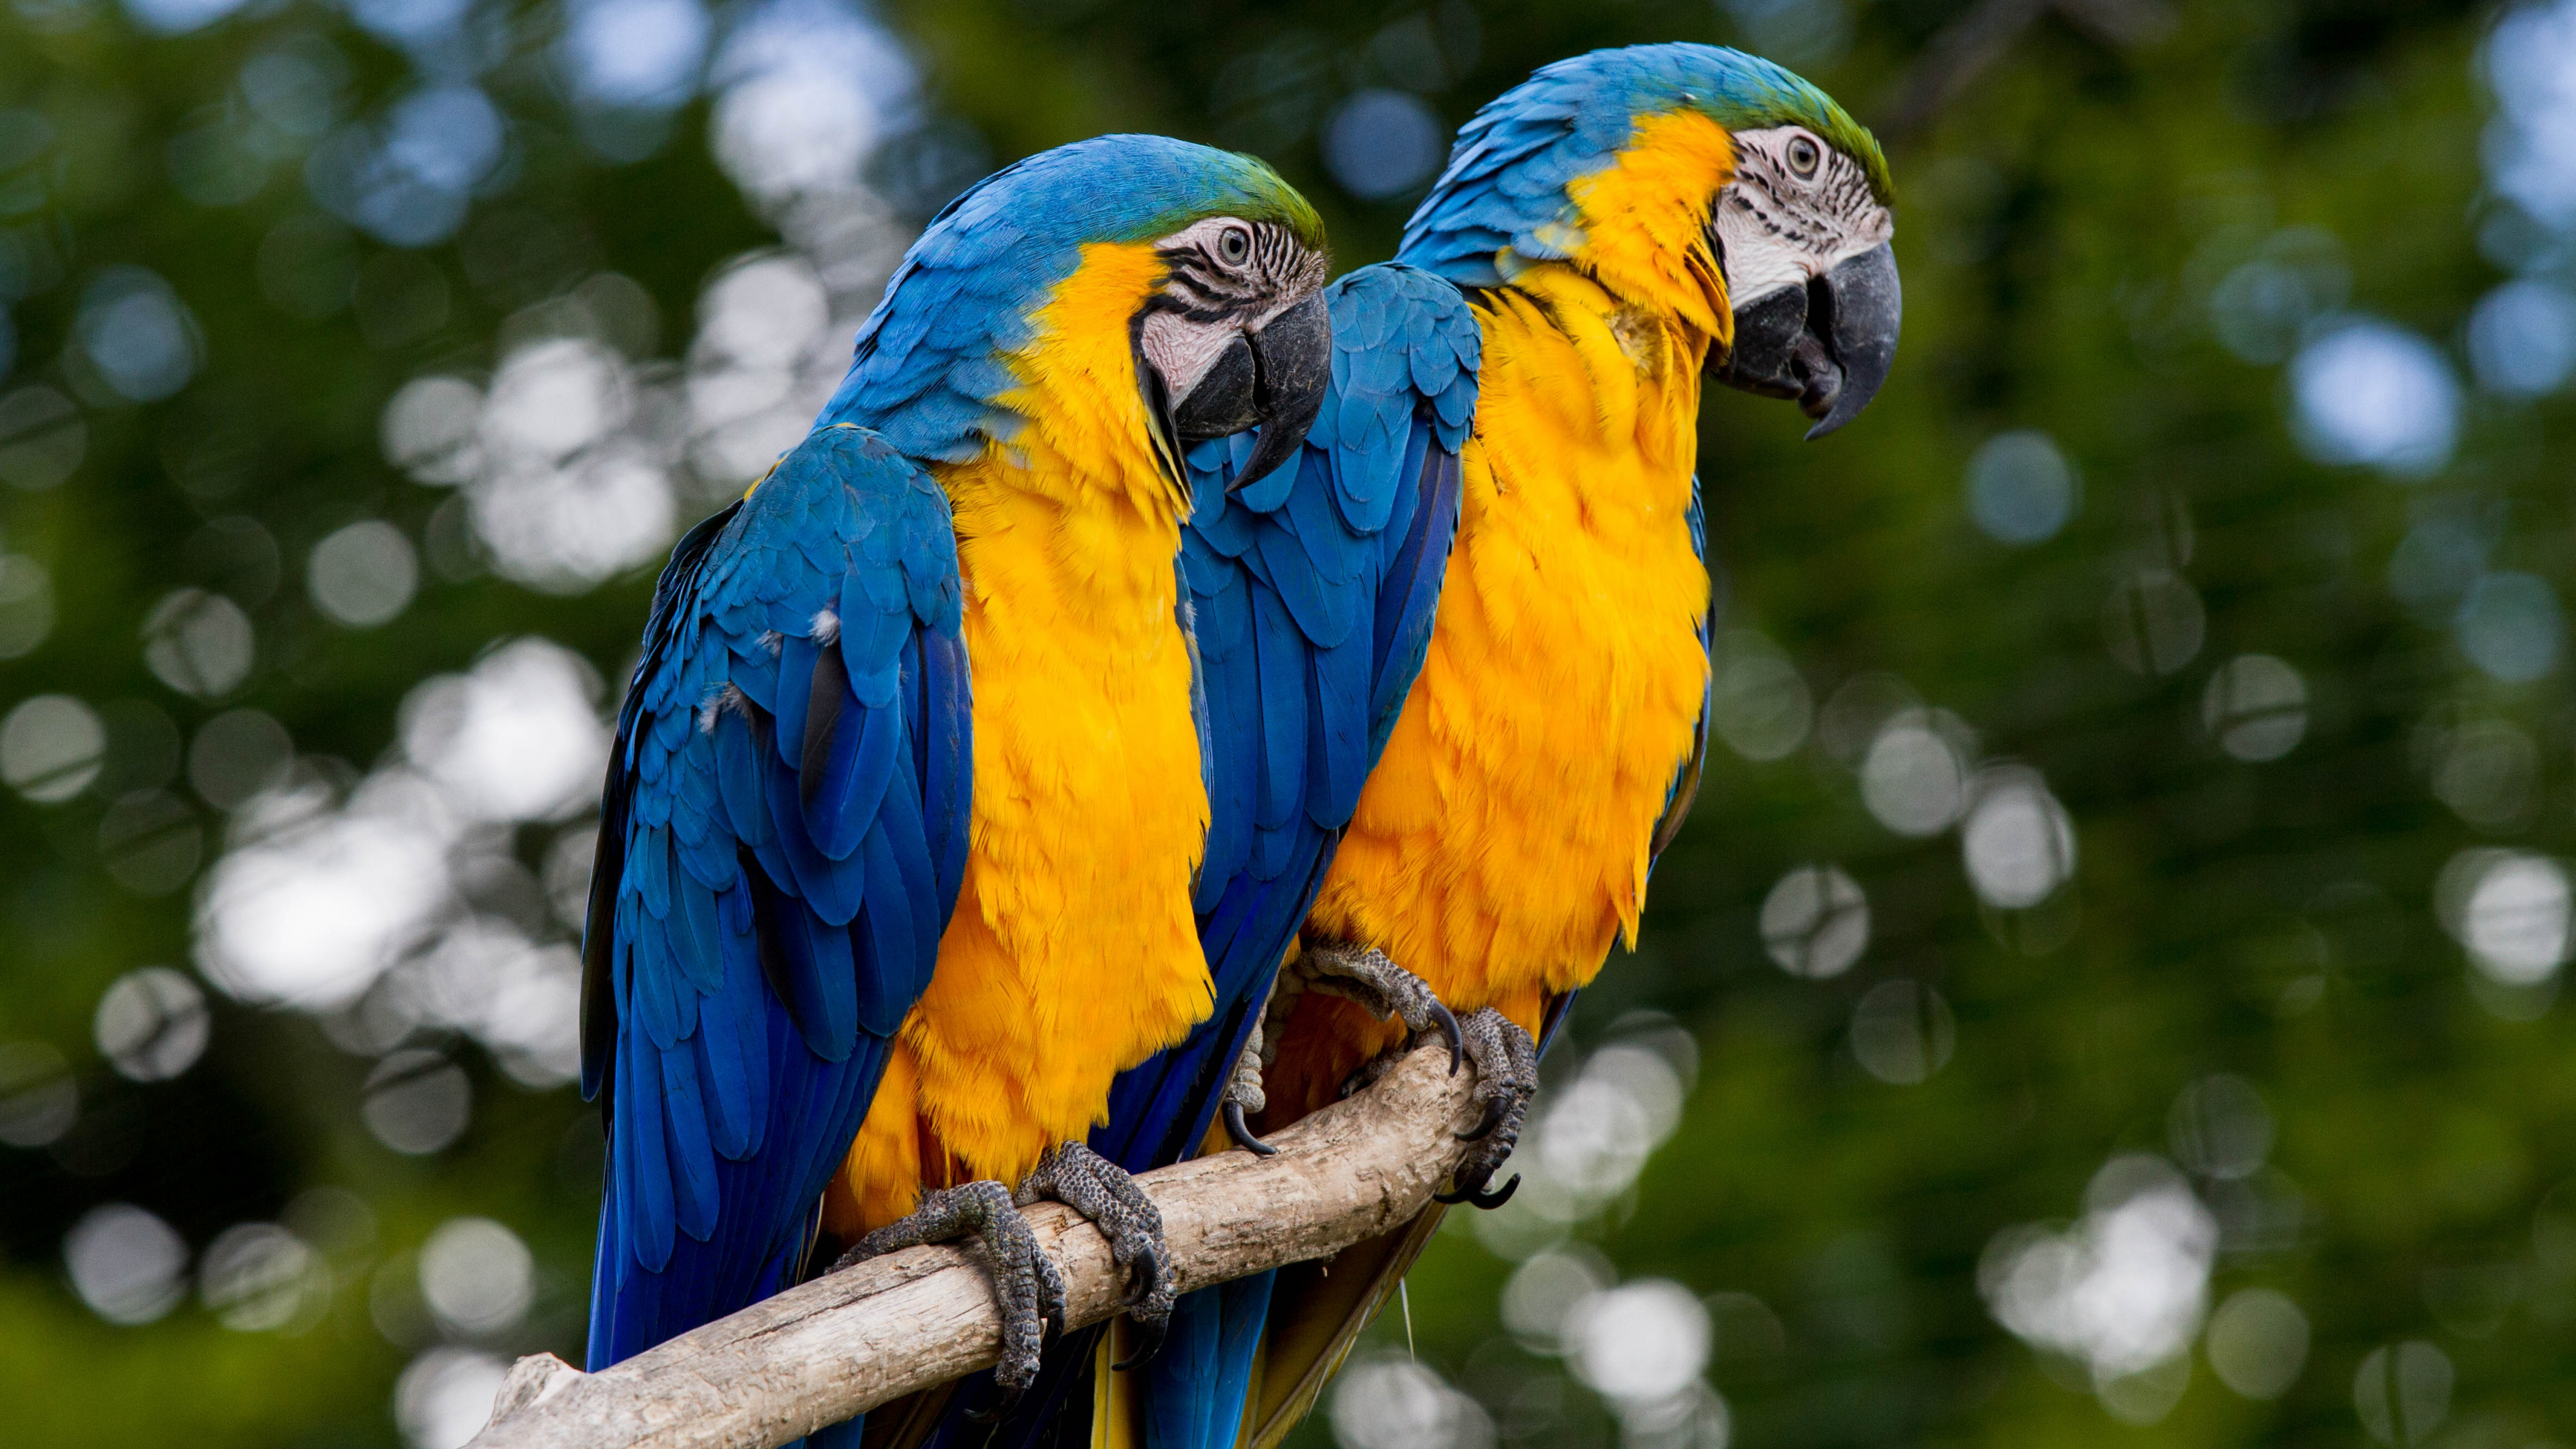 Wallpaper Macaw, Colorful Parrot, Pair, Hd Image, Picture, Background, 9740af